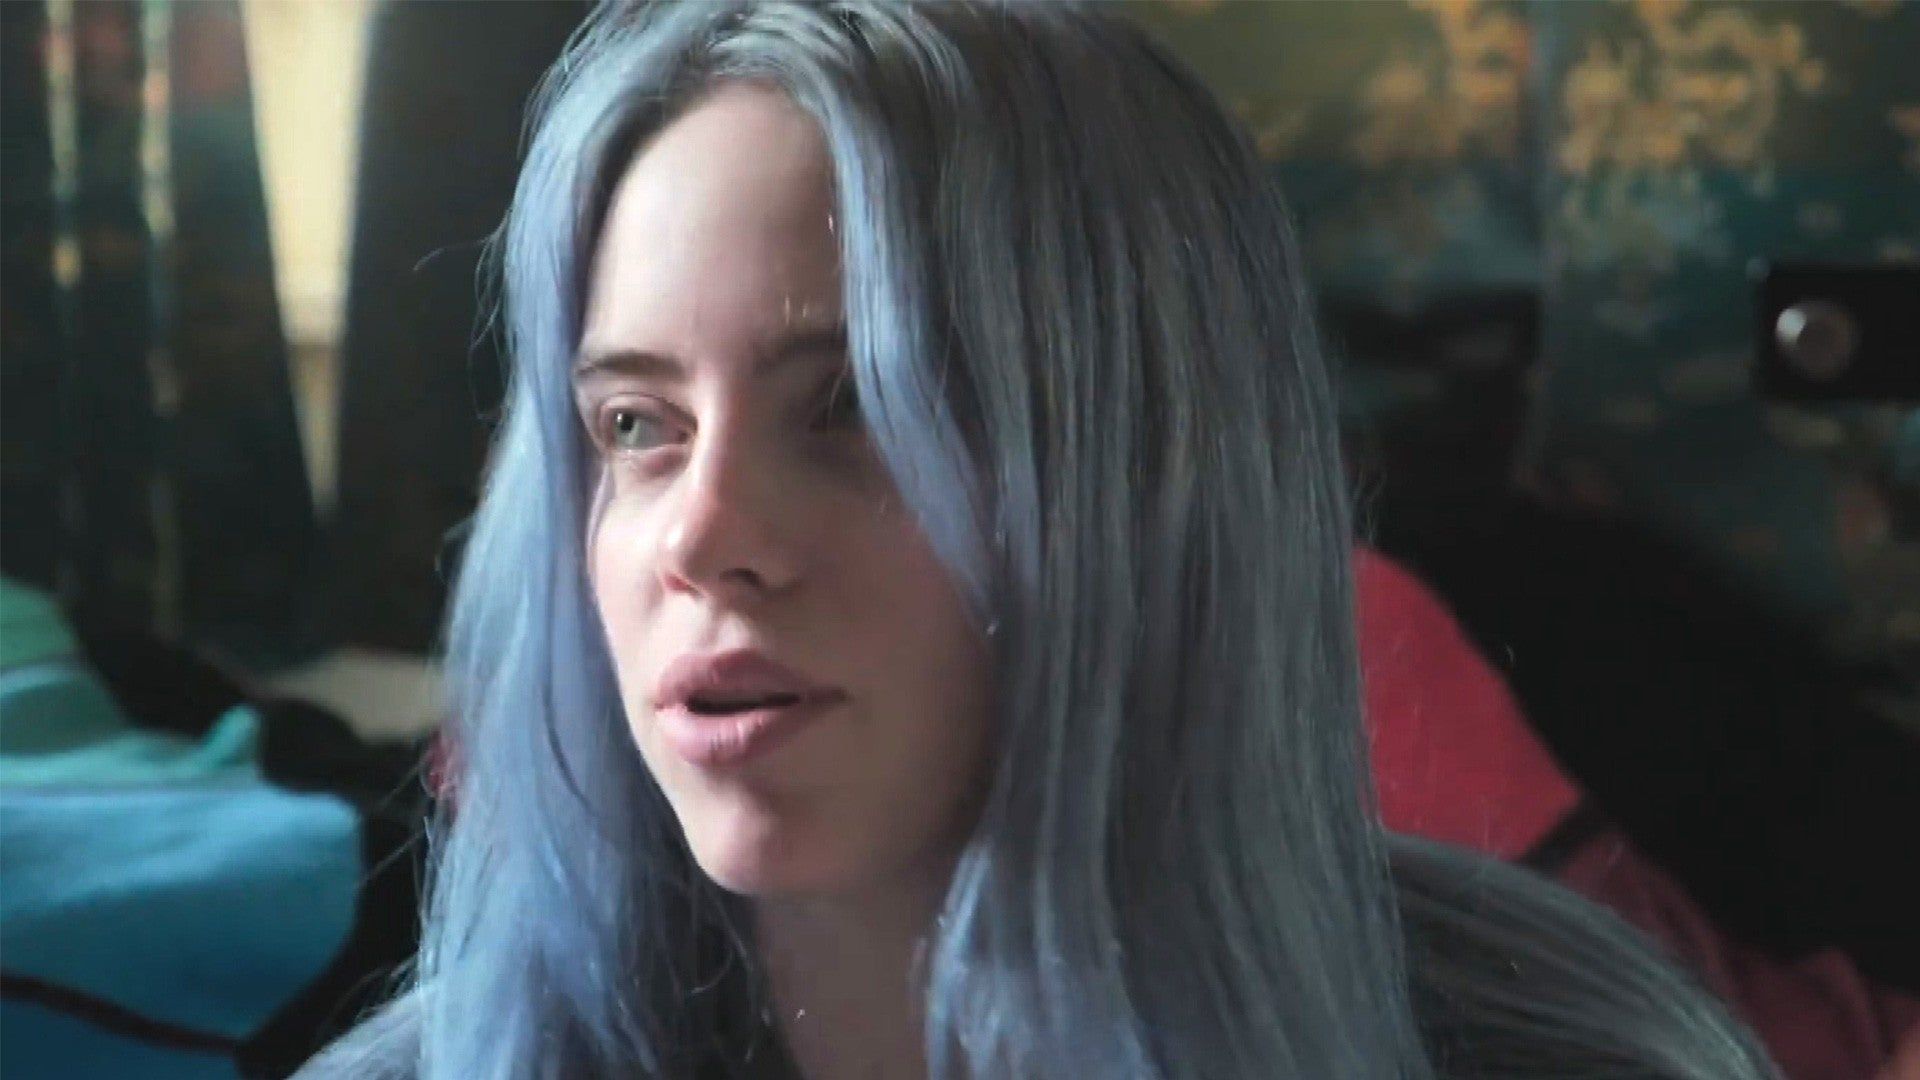 How to Watch 'Billie Eilish: The World's a Little Blurry' on Apple TV Plus